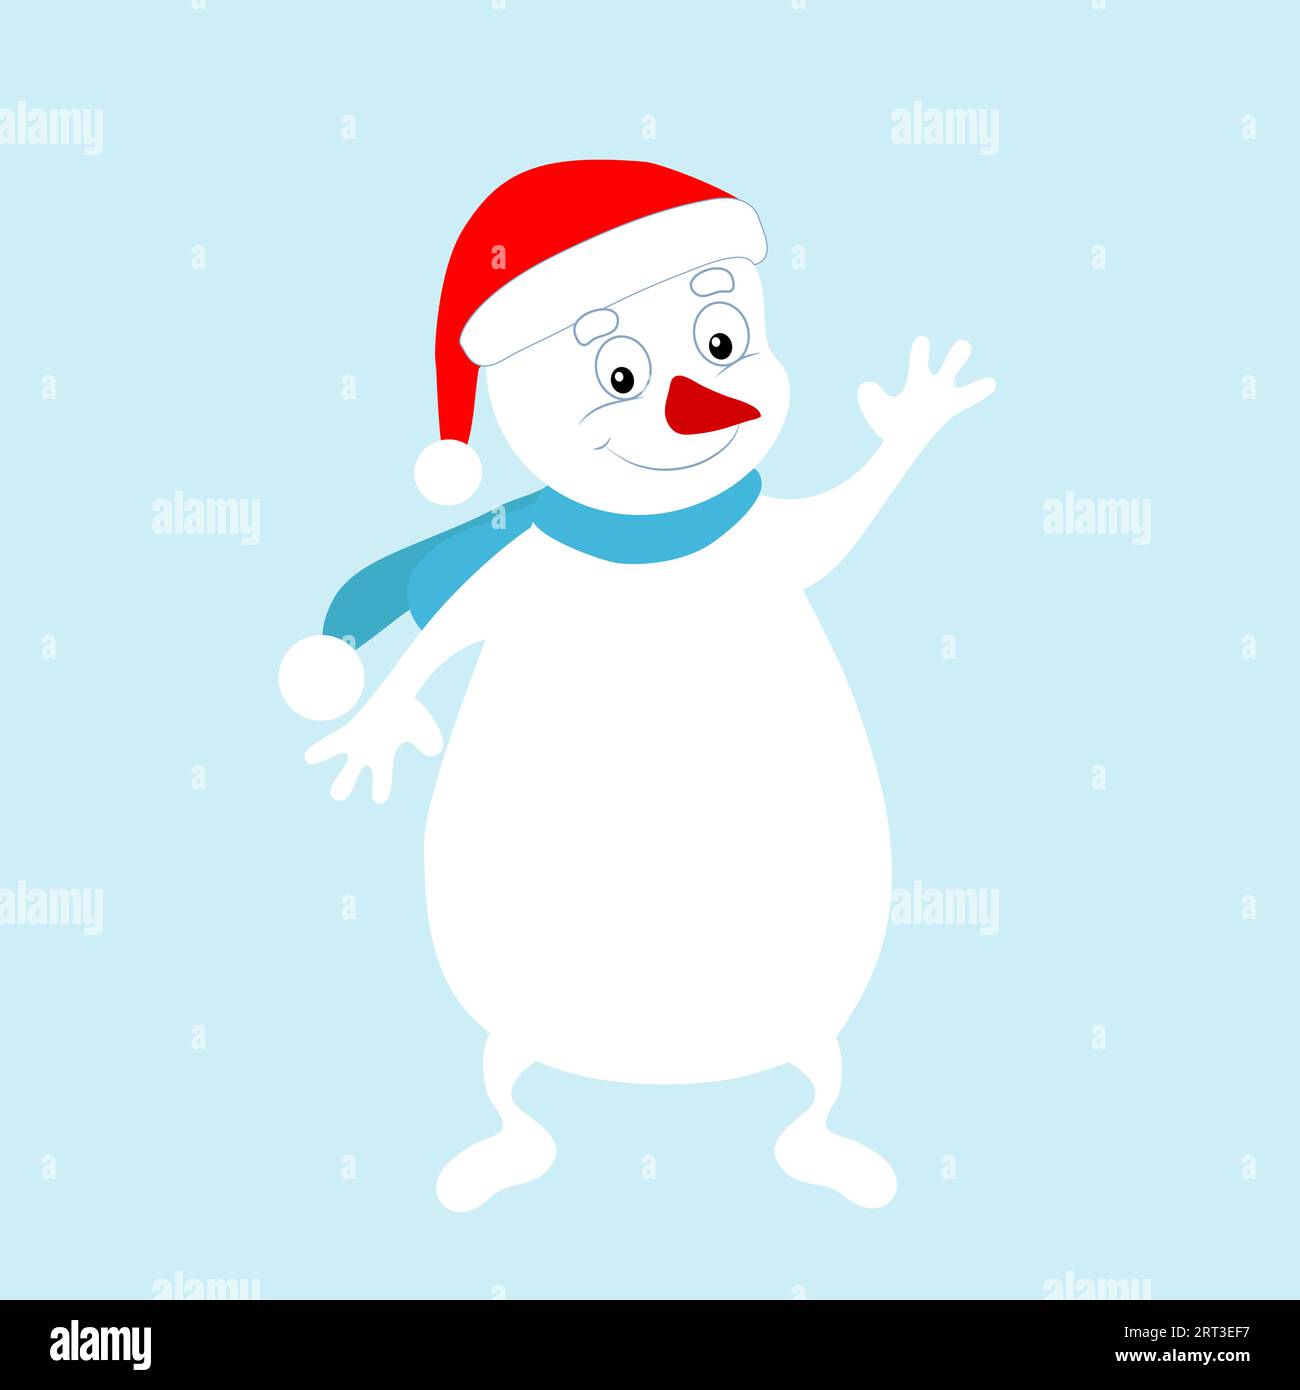 Cheerful joyful snowman in a hat of Santa Claus waves his hand. Picture of a cartoon winter character. Vector for New Year's greetings, decor. Stock Vector